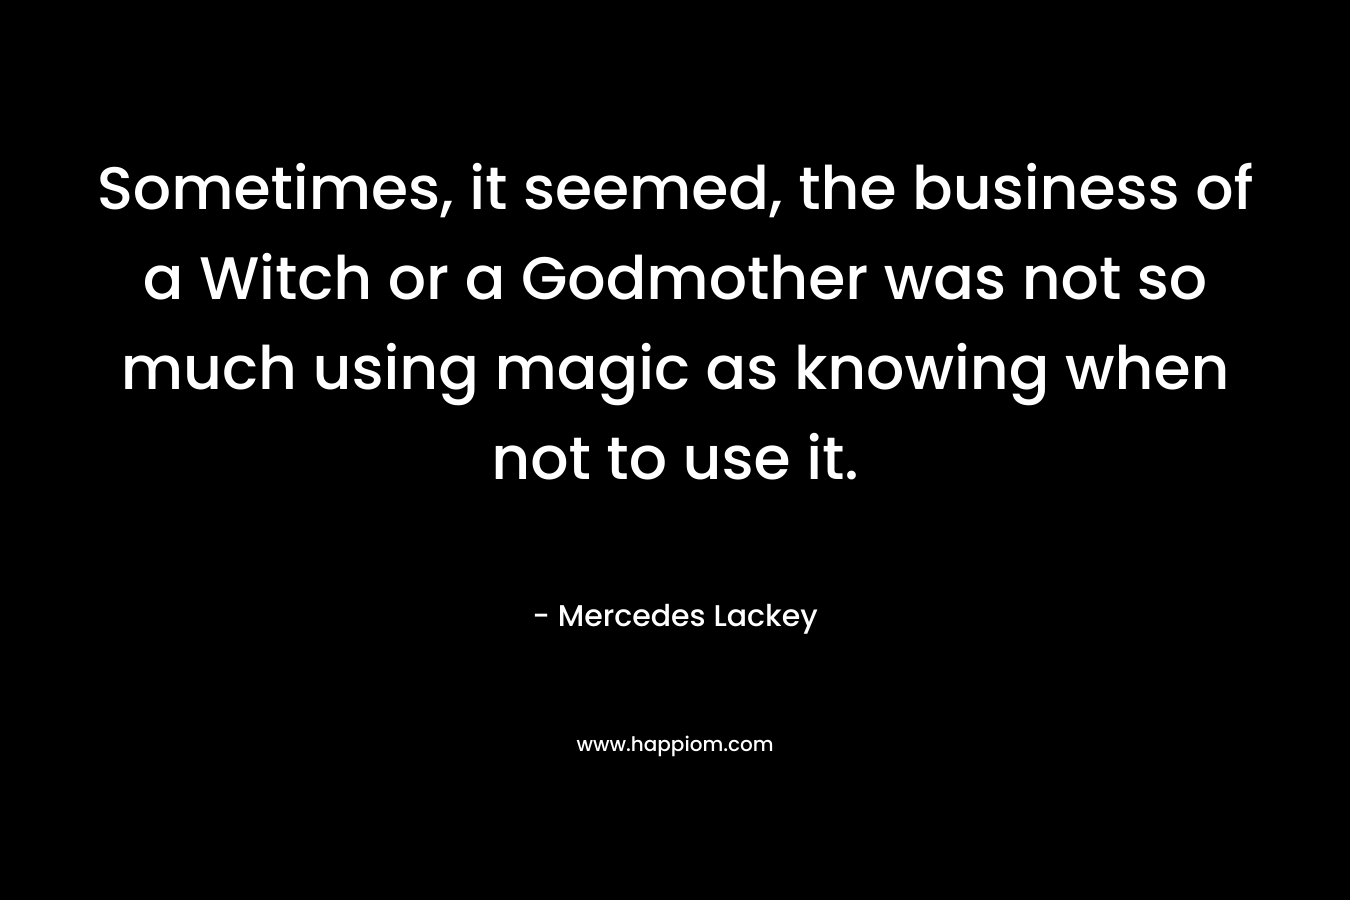 Sometimes, it seemed, the business of a Witch or a Godmother was not so much using magic as knowing when not to use it.